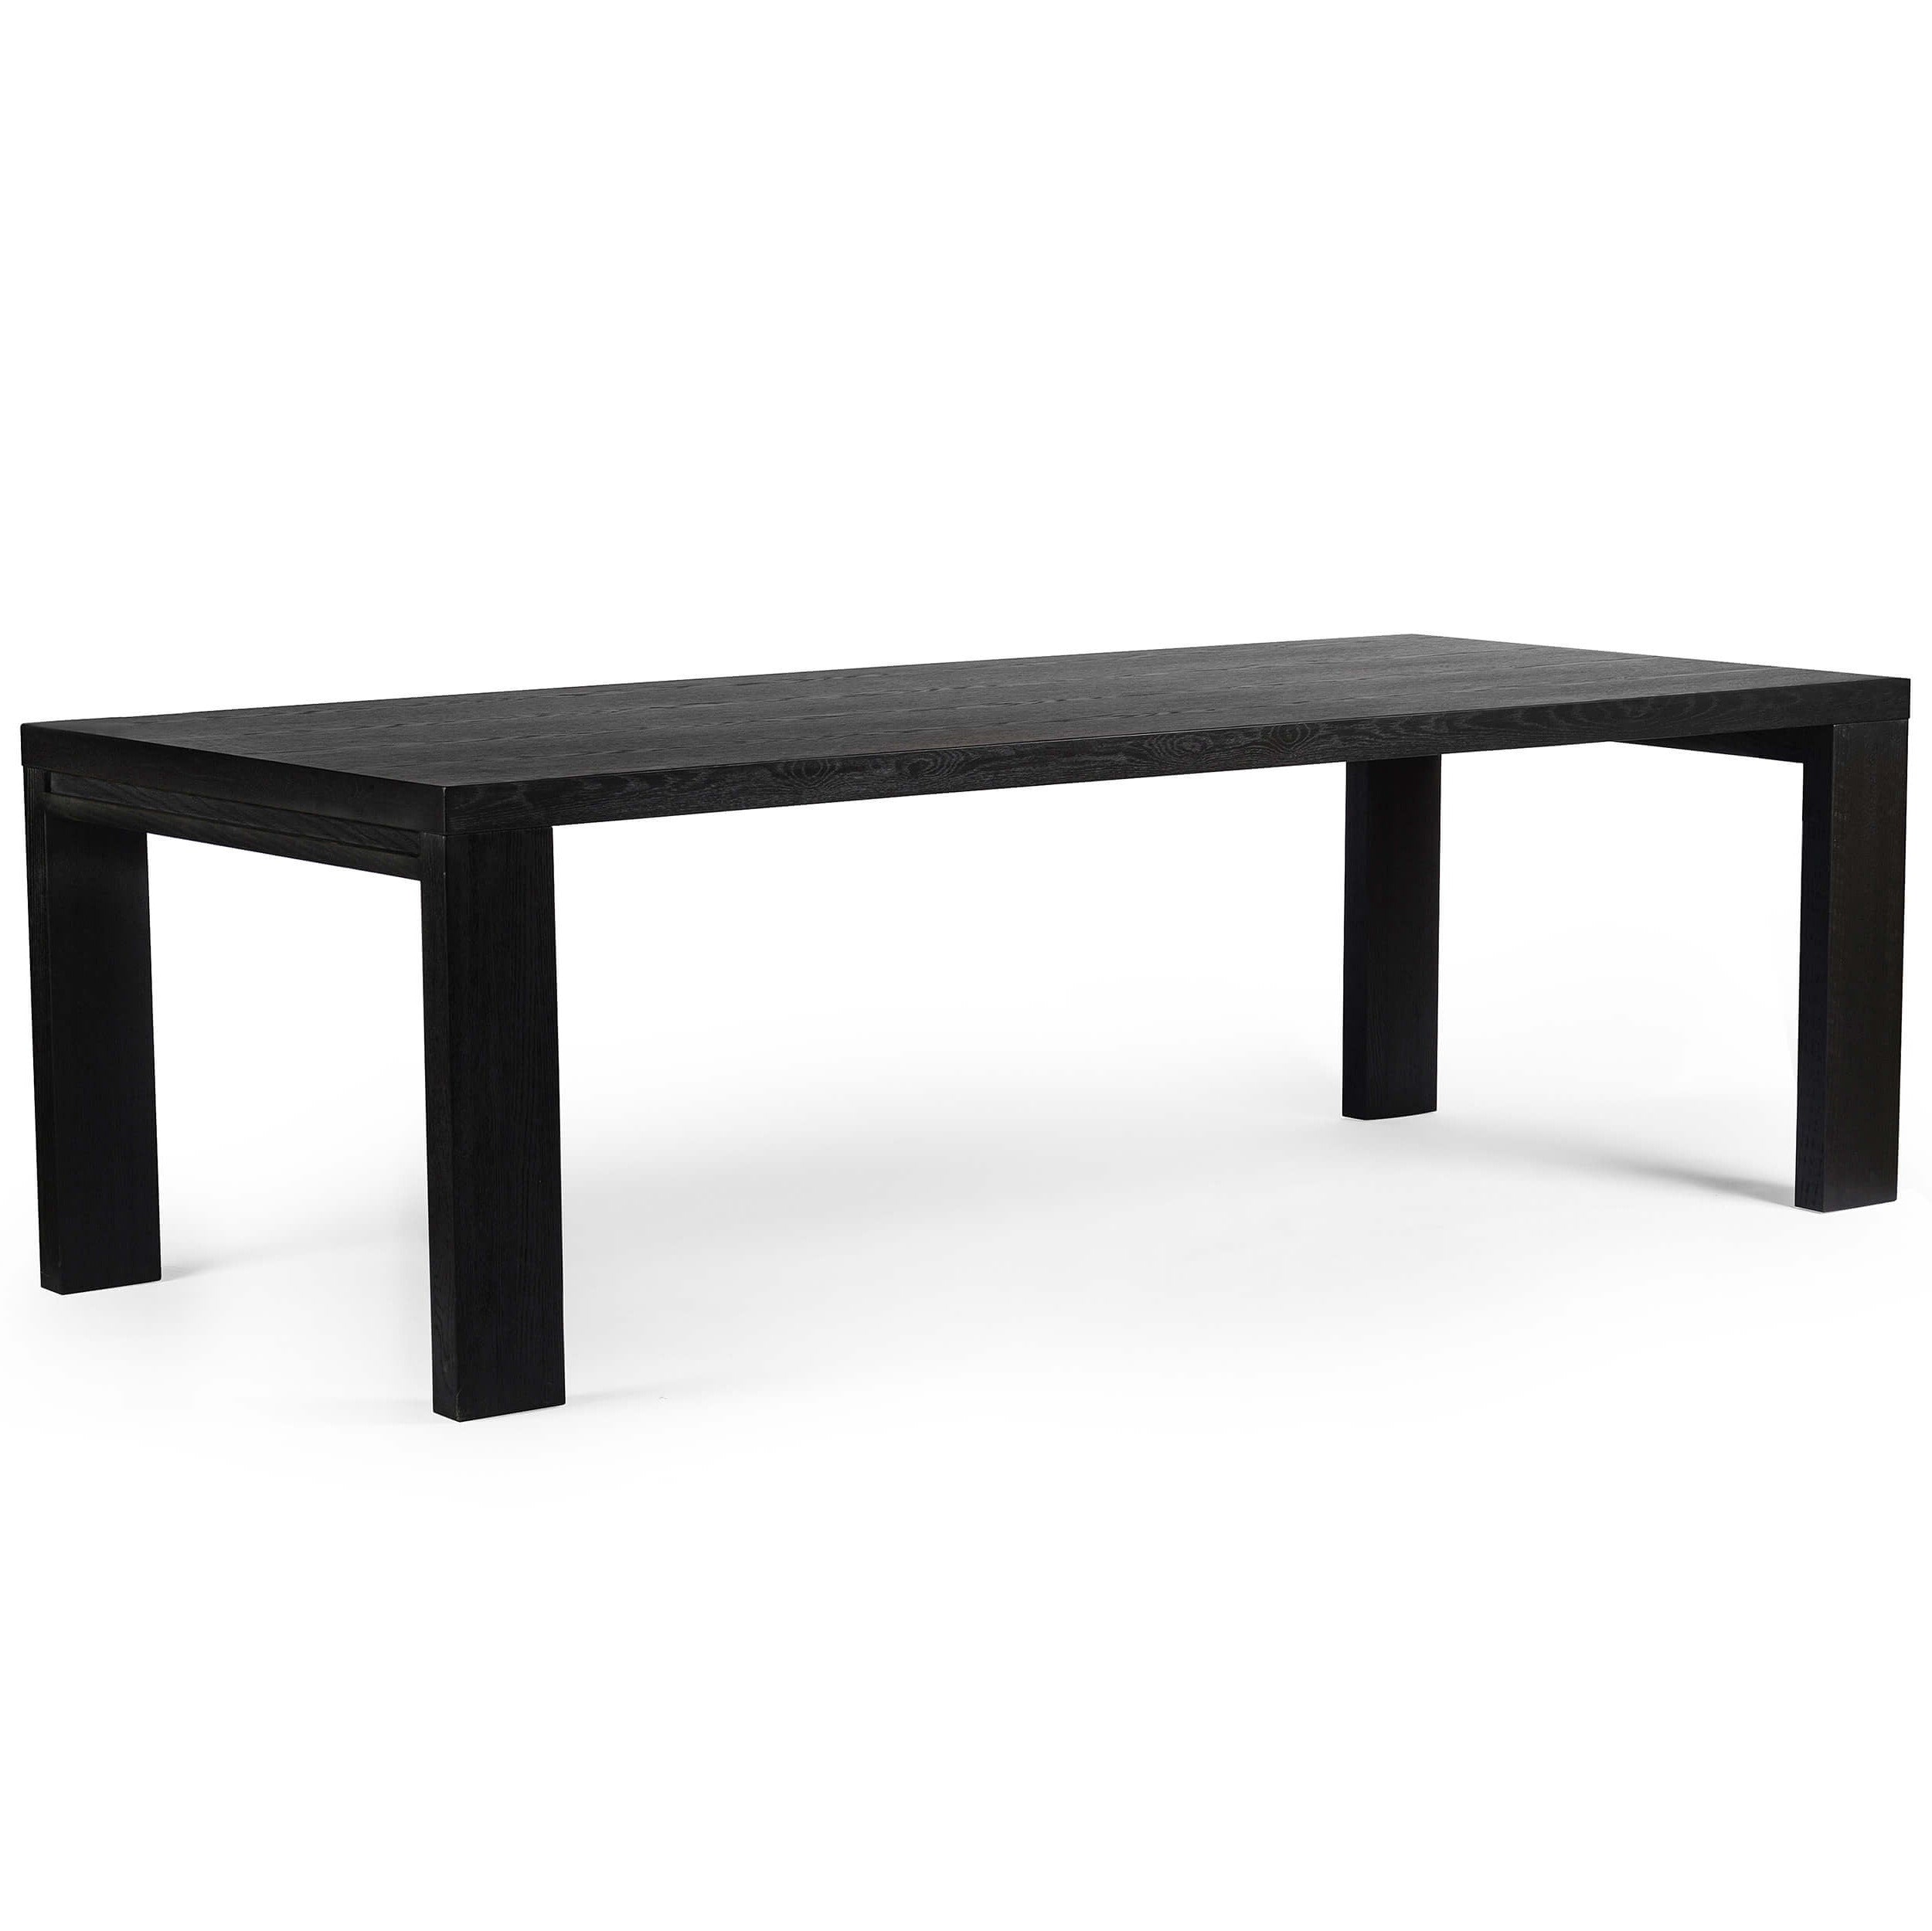 Image of Millie Dining Table, Drifted Matte Black